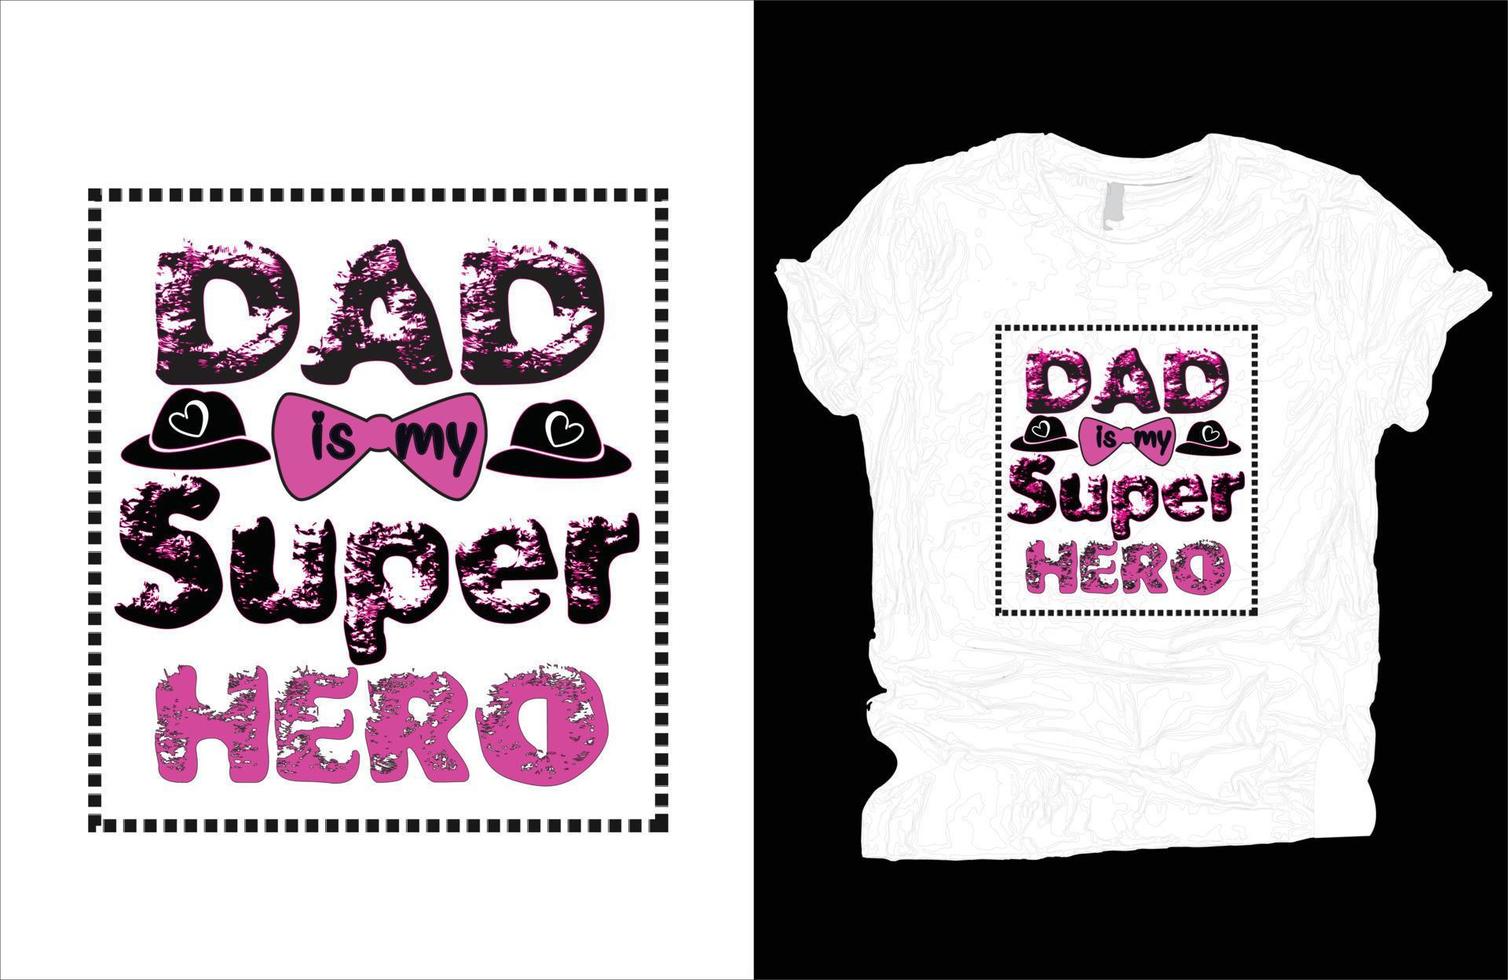 Dad is my super hero t shirt vector, fathers day t shirt design, dad t shirt vector. vector